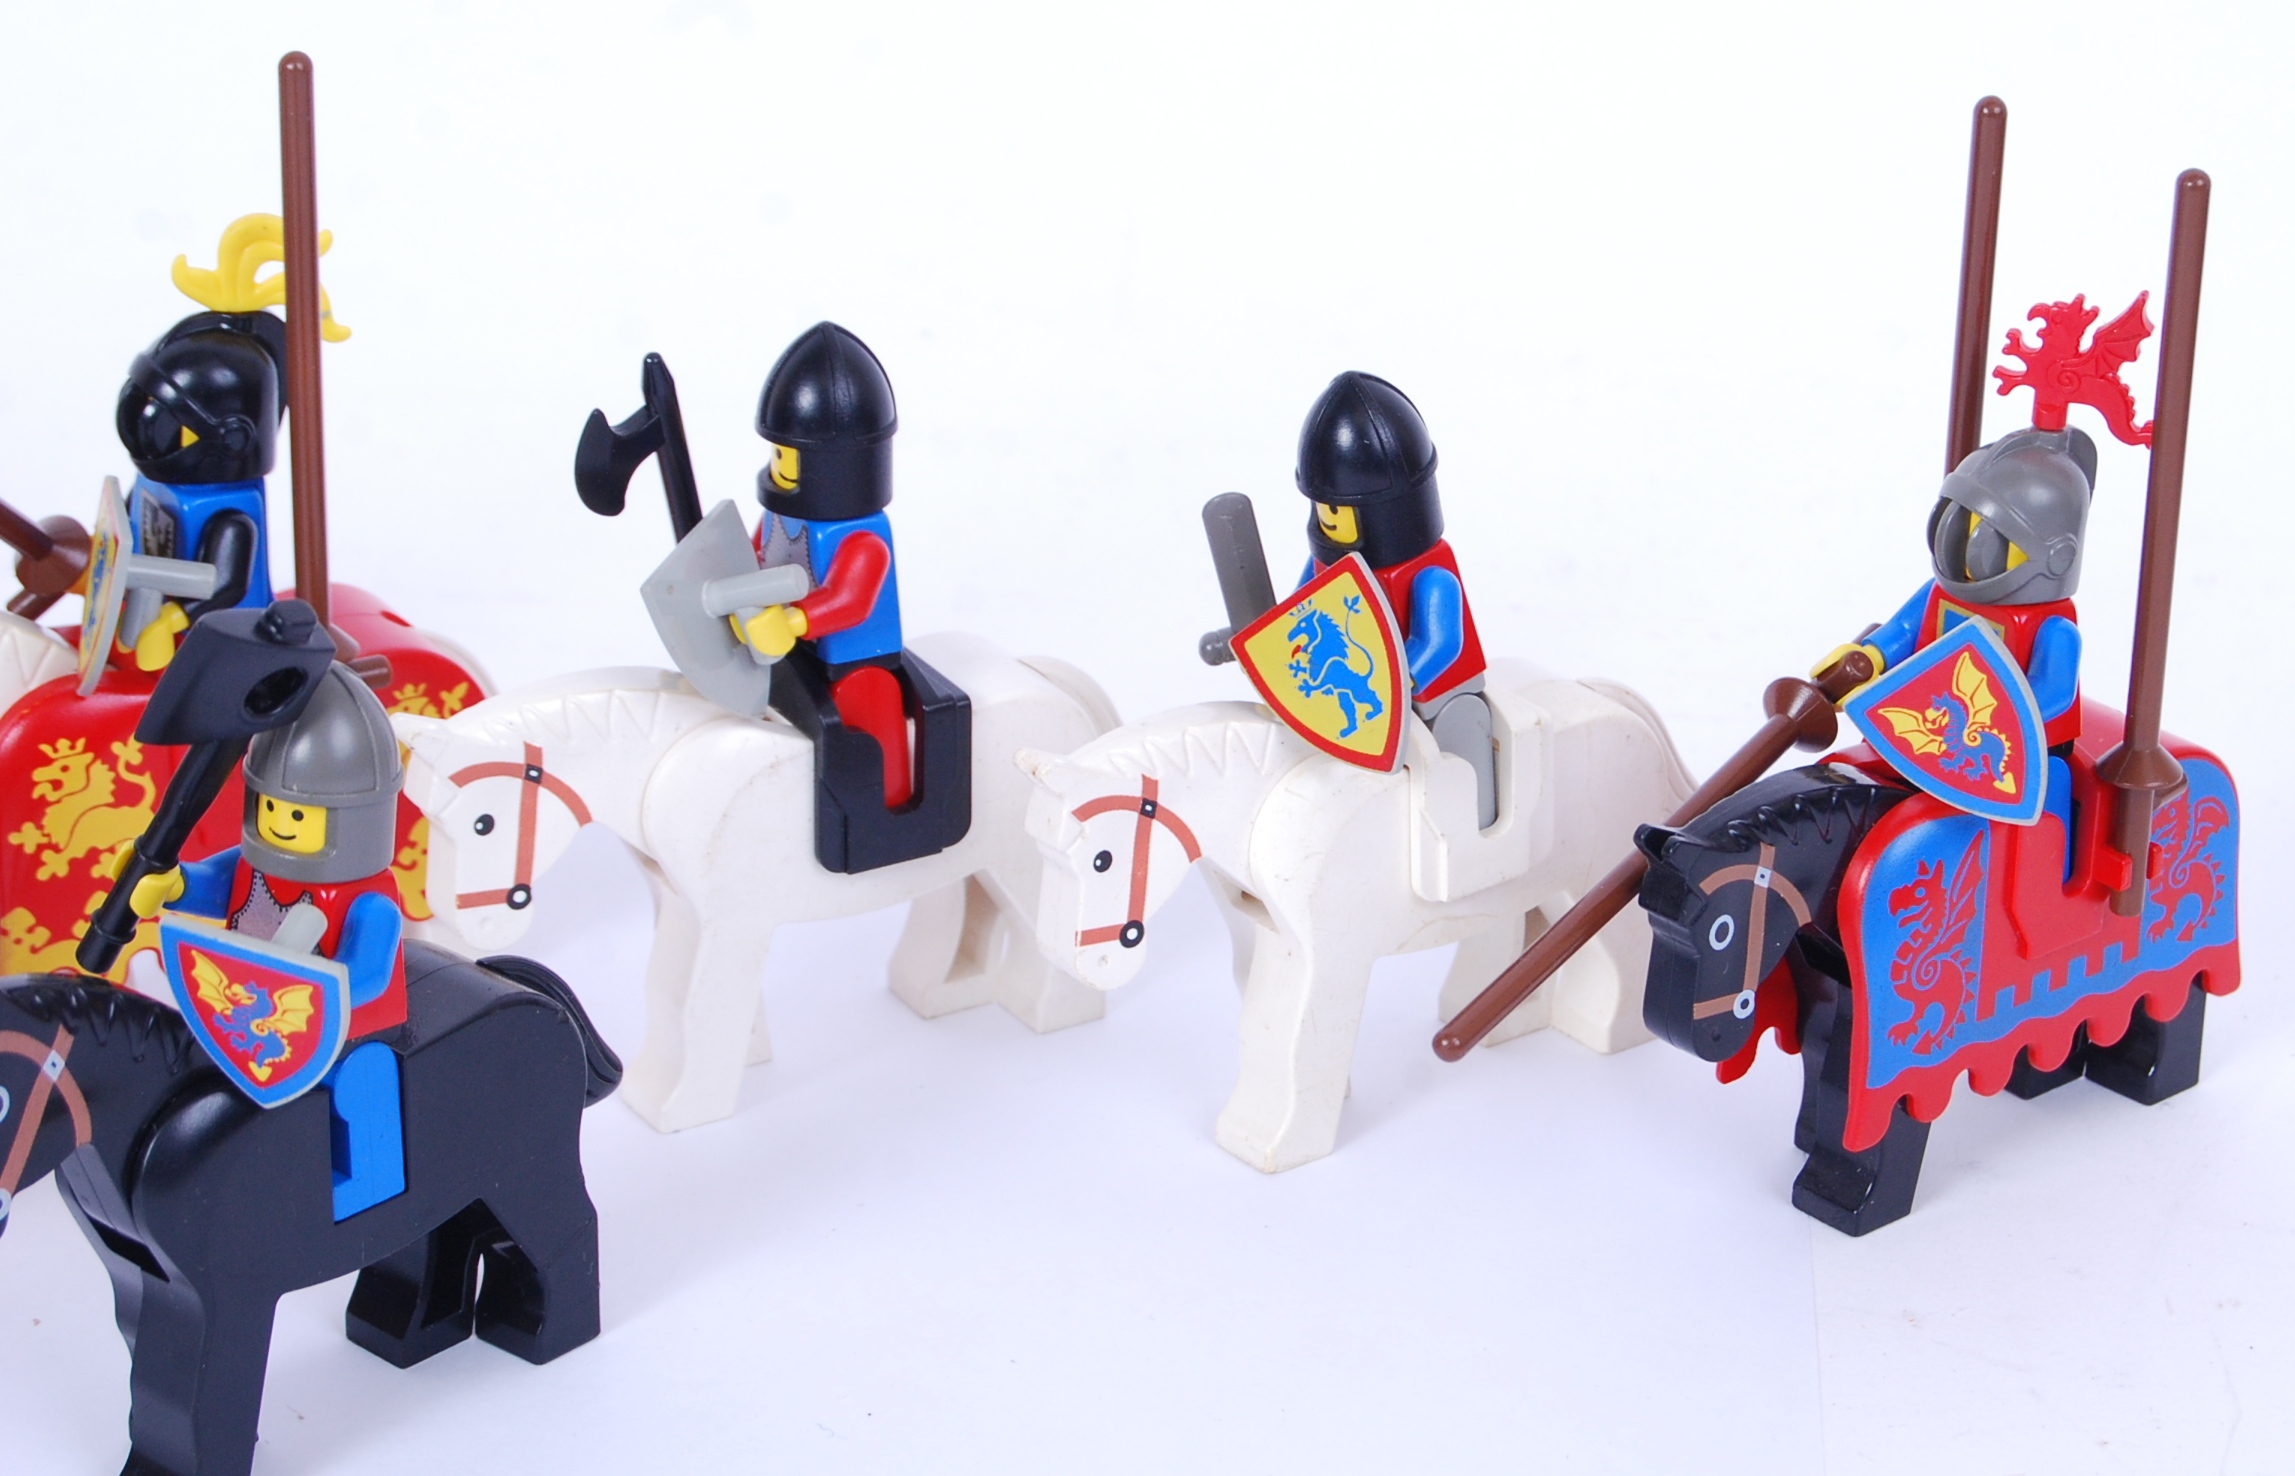 VINTAGE MINIFIGURES: A collection of 12x vintage 1980's Lego minifigures - all knights on horseback, - Image 4 of 4